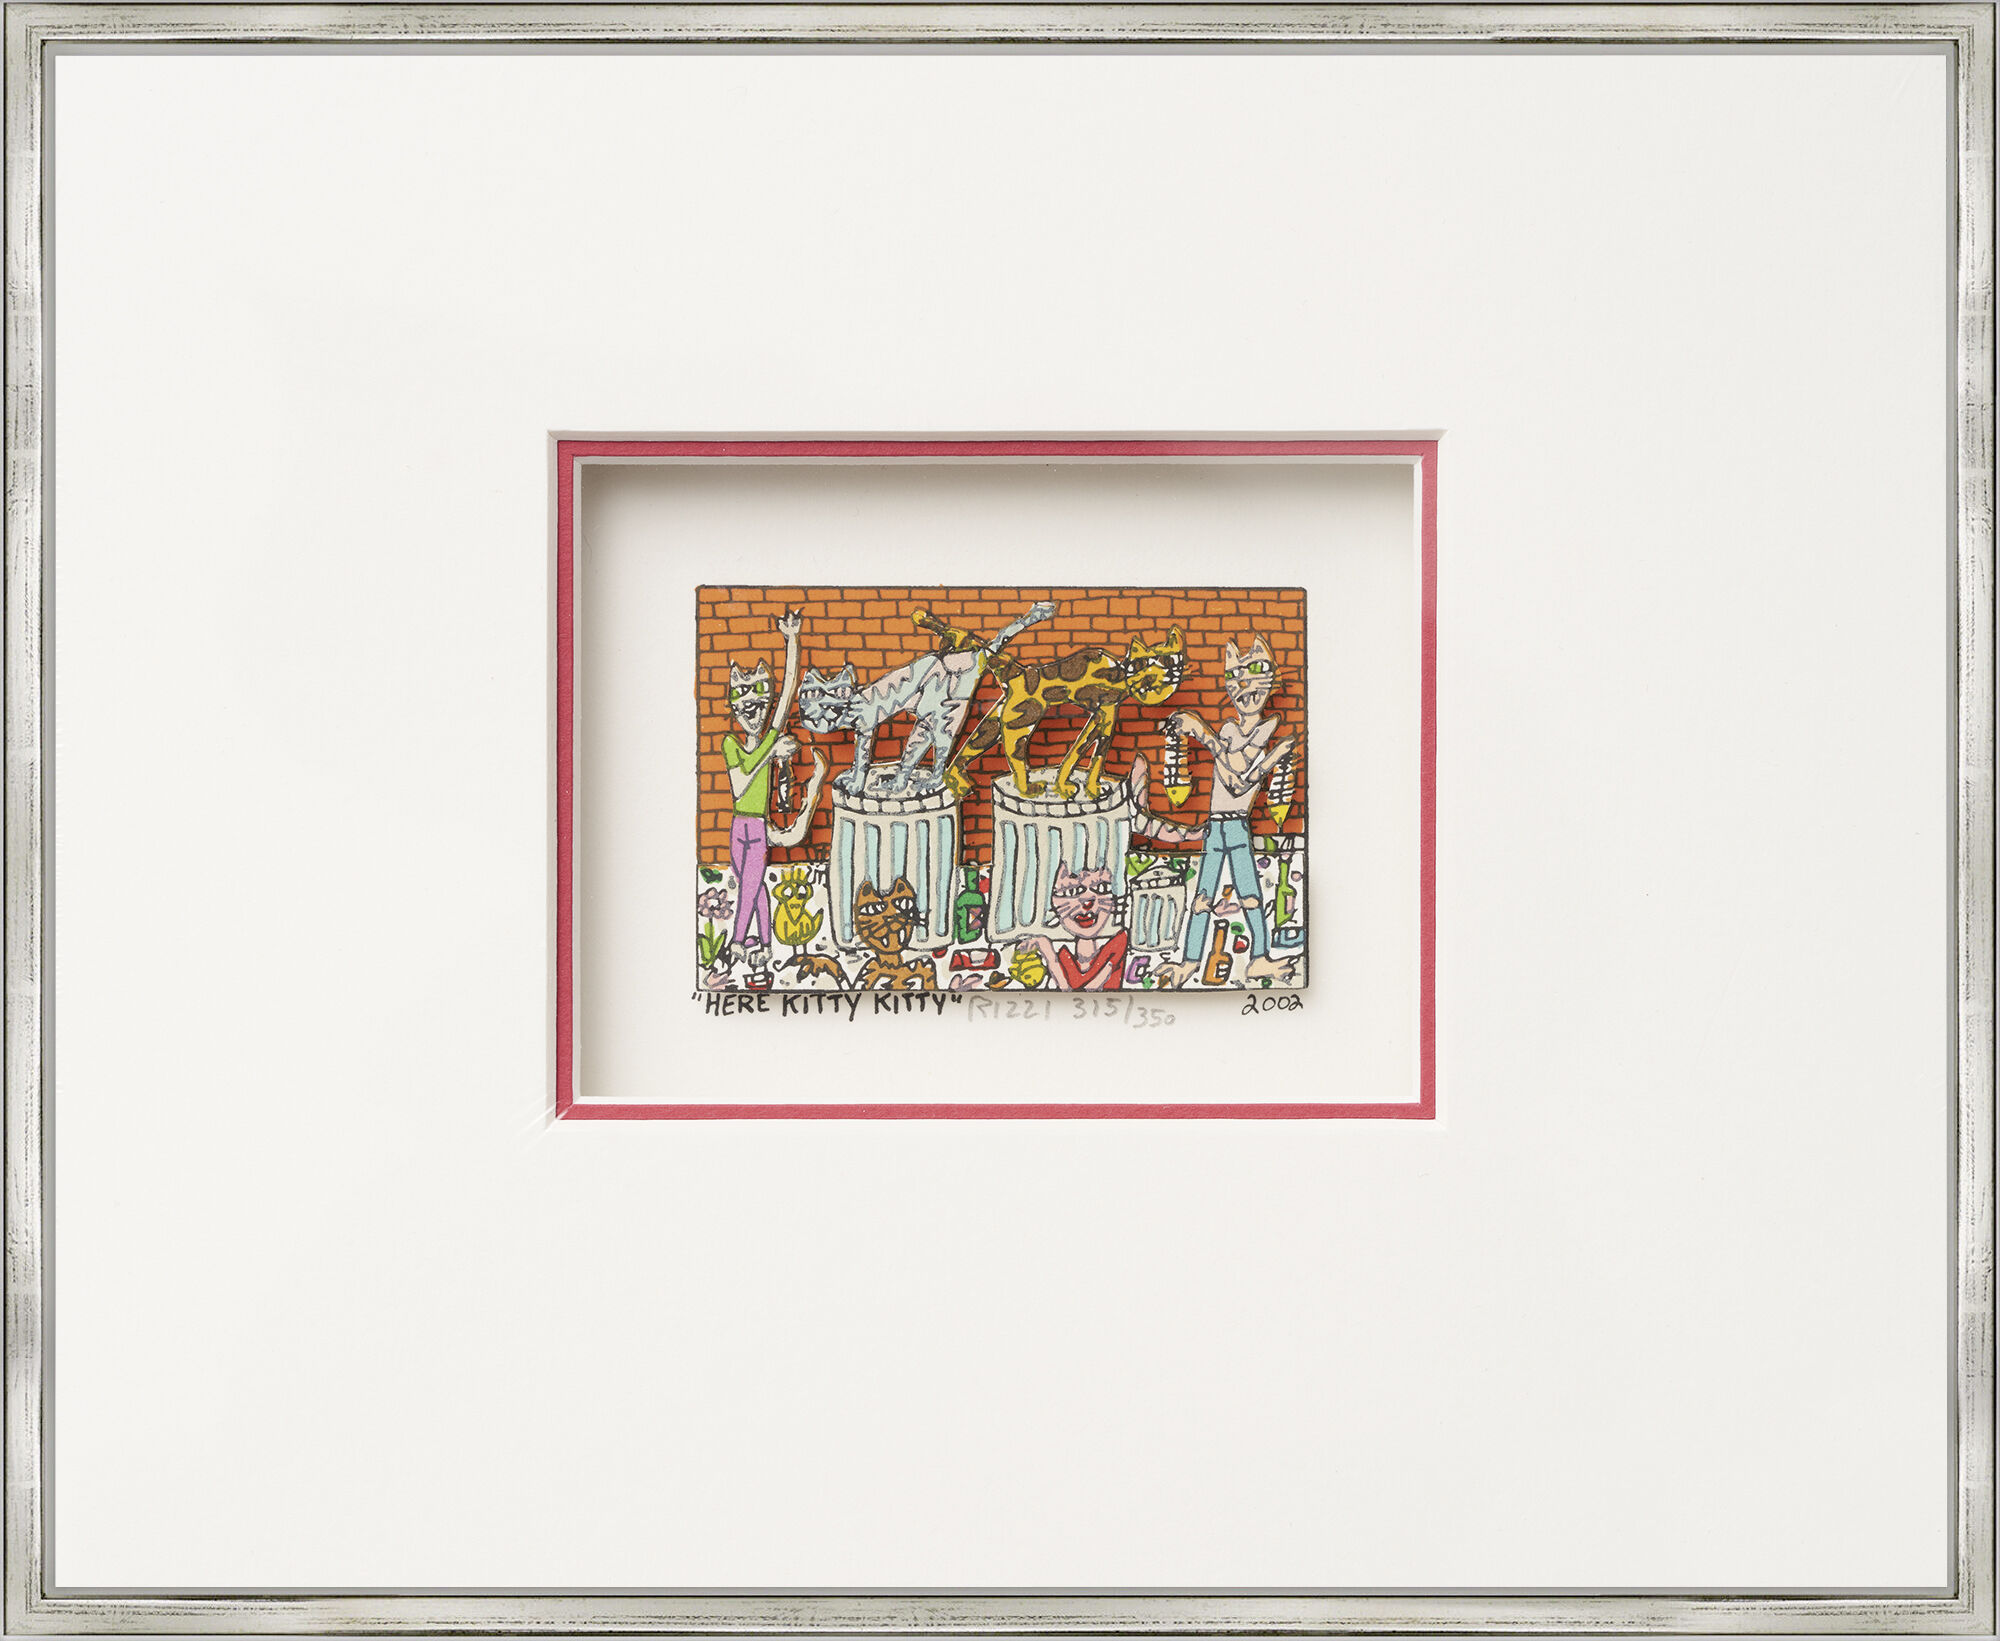 Picture "Here Kitty Kitty" (2002) by James Rizzi